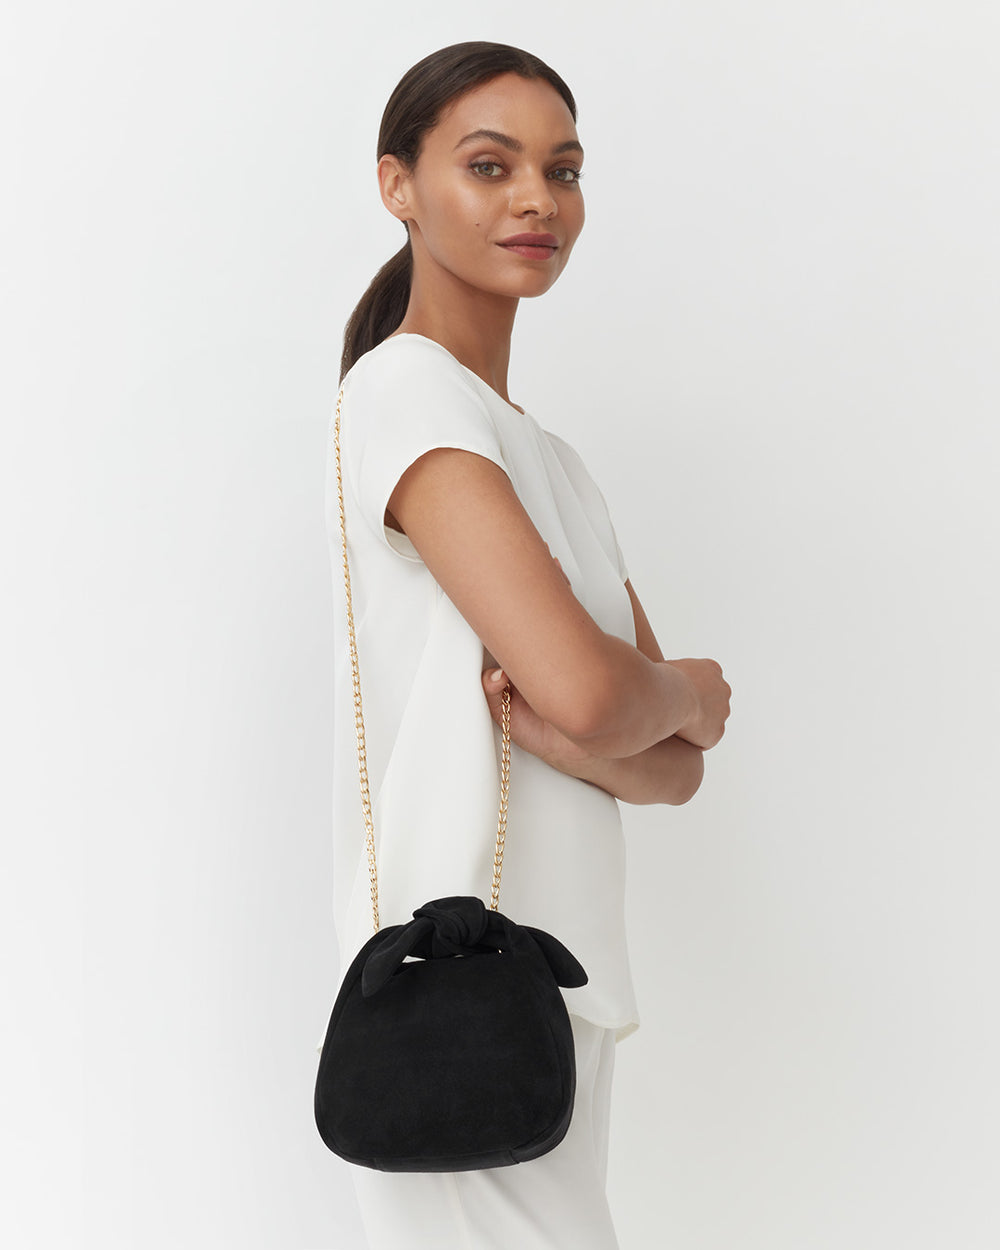 Woman standing, looking over her shoulder, holding a handbag with chain.